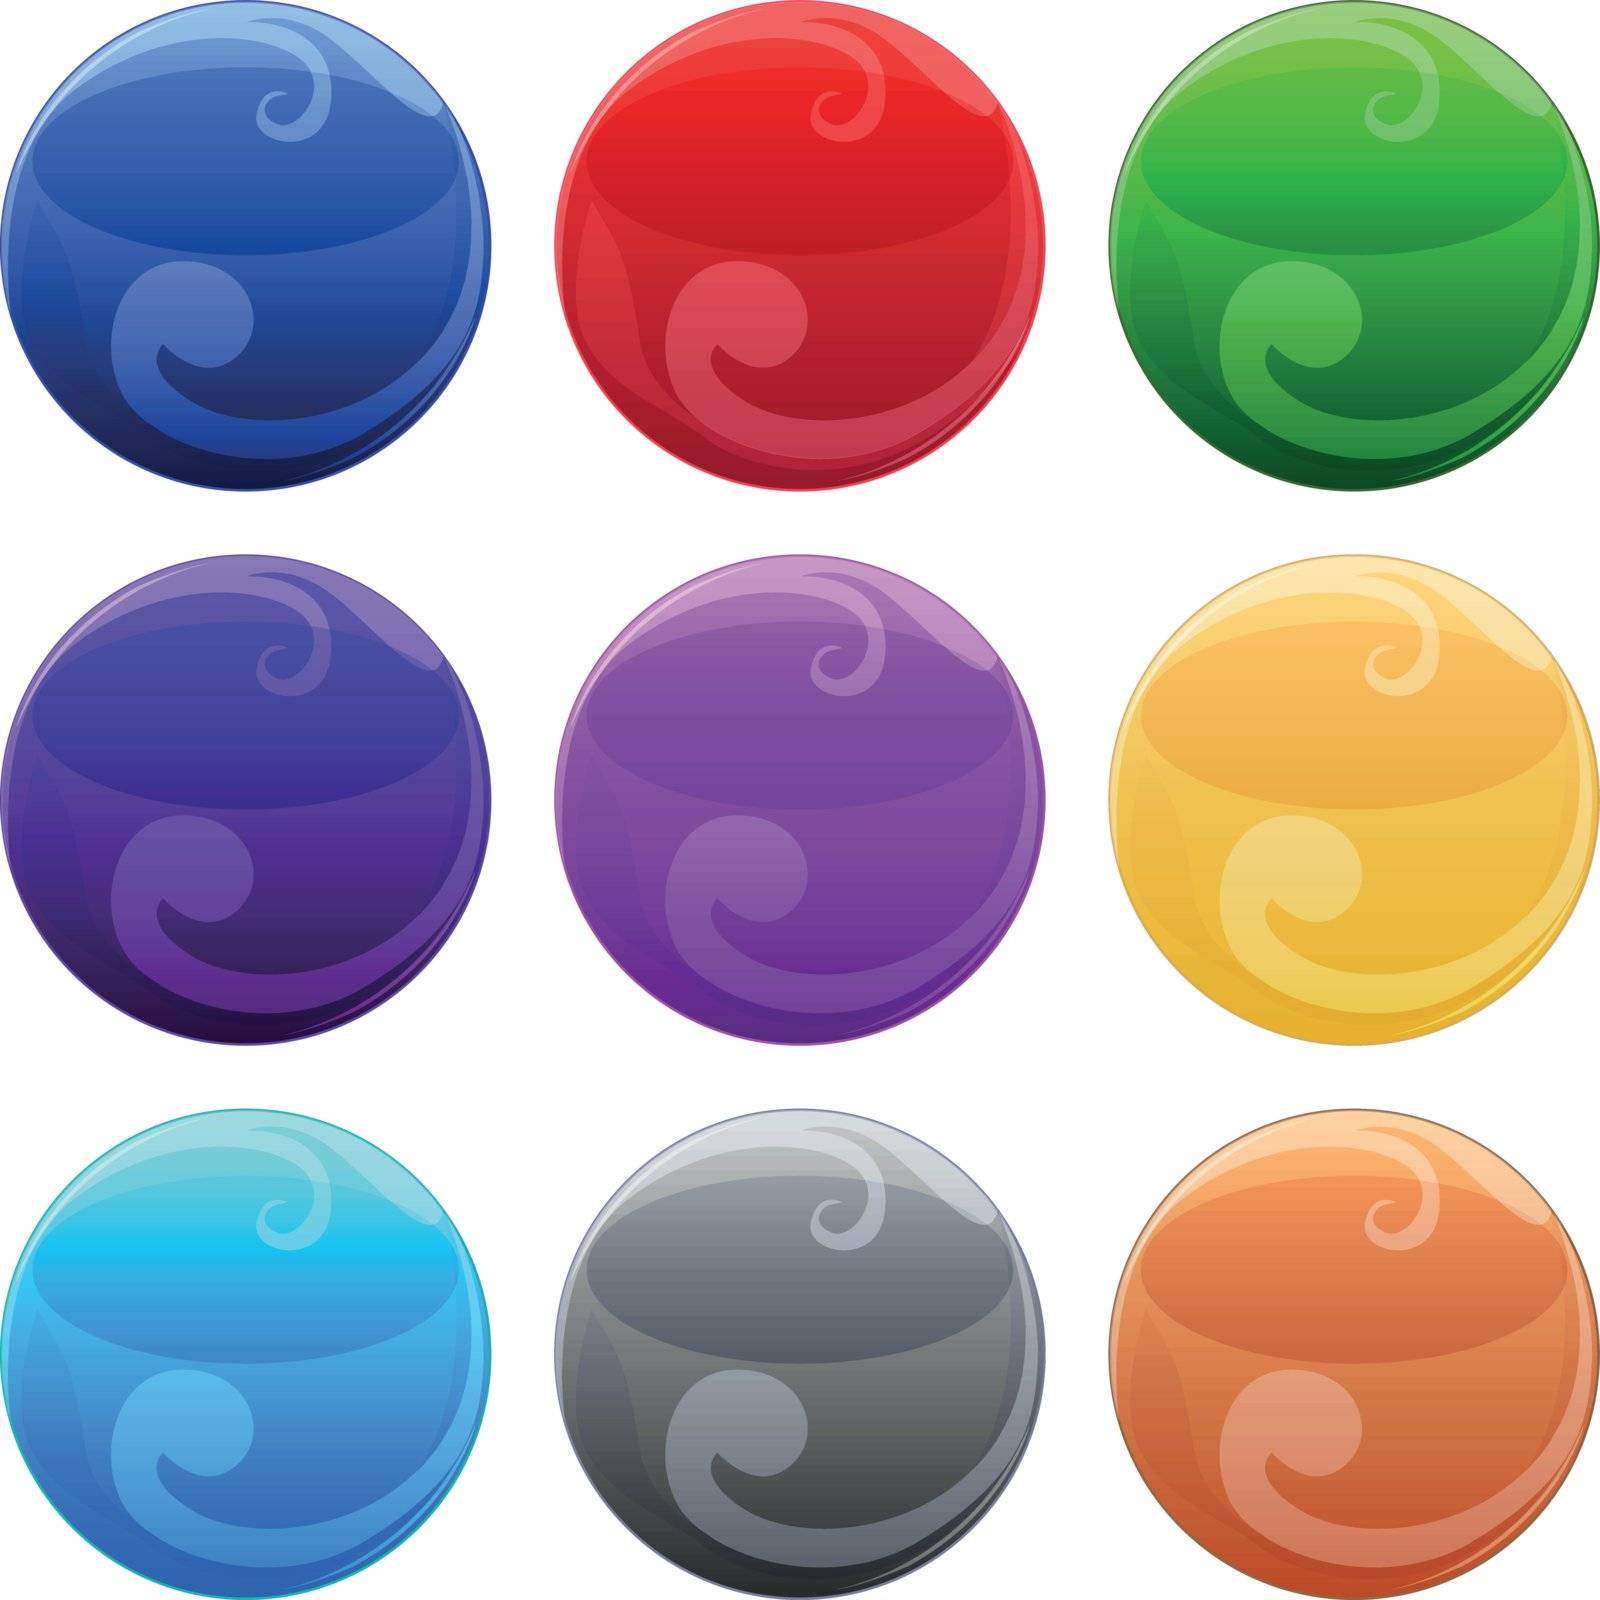 set of 9 colorful decorative buttons